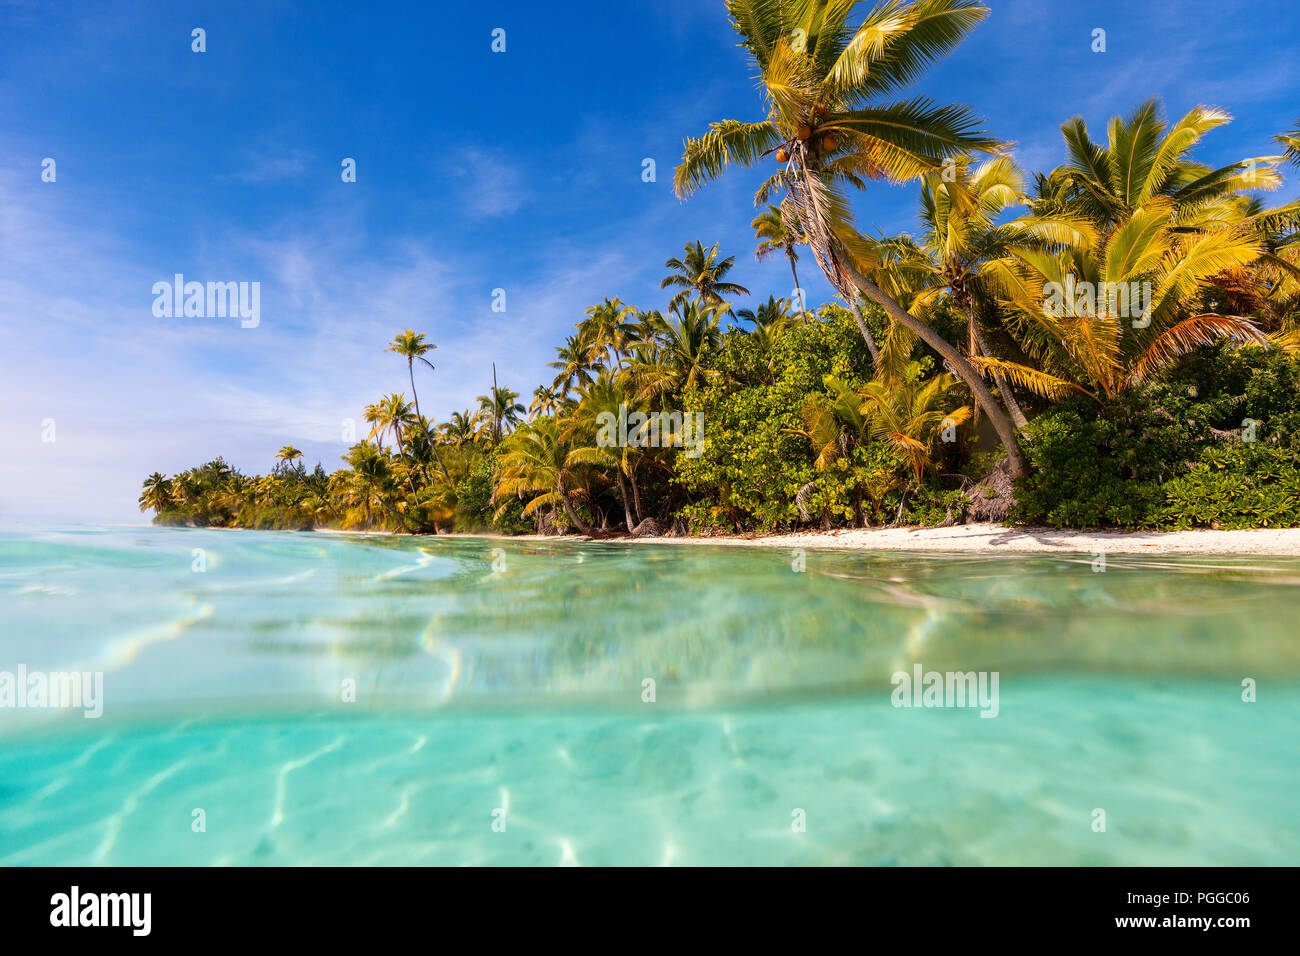 Stunning tropical island with palm trees, white sand, turquoise ocean water and blue sky at Cook Islands, South Pacific Stock Photo